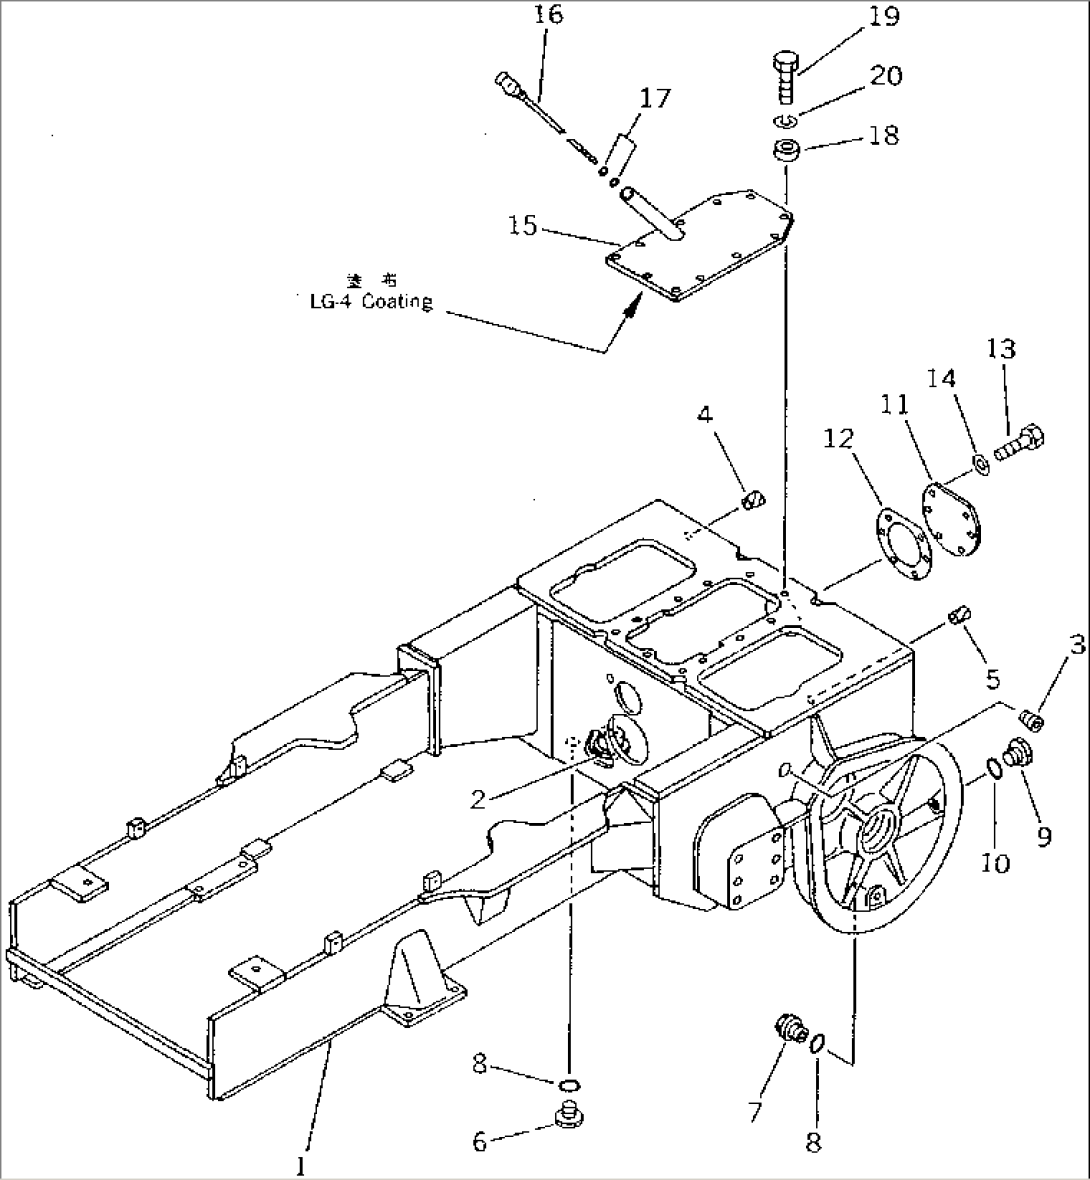 STEERING CASE AND MAIN FRAME (FOR SEMI-LONG LIFT ARM)